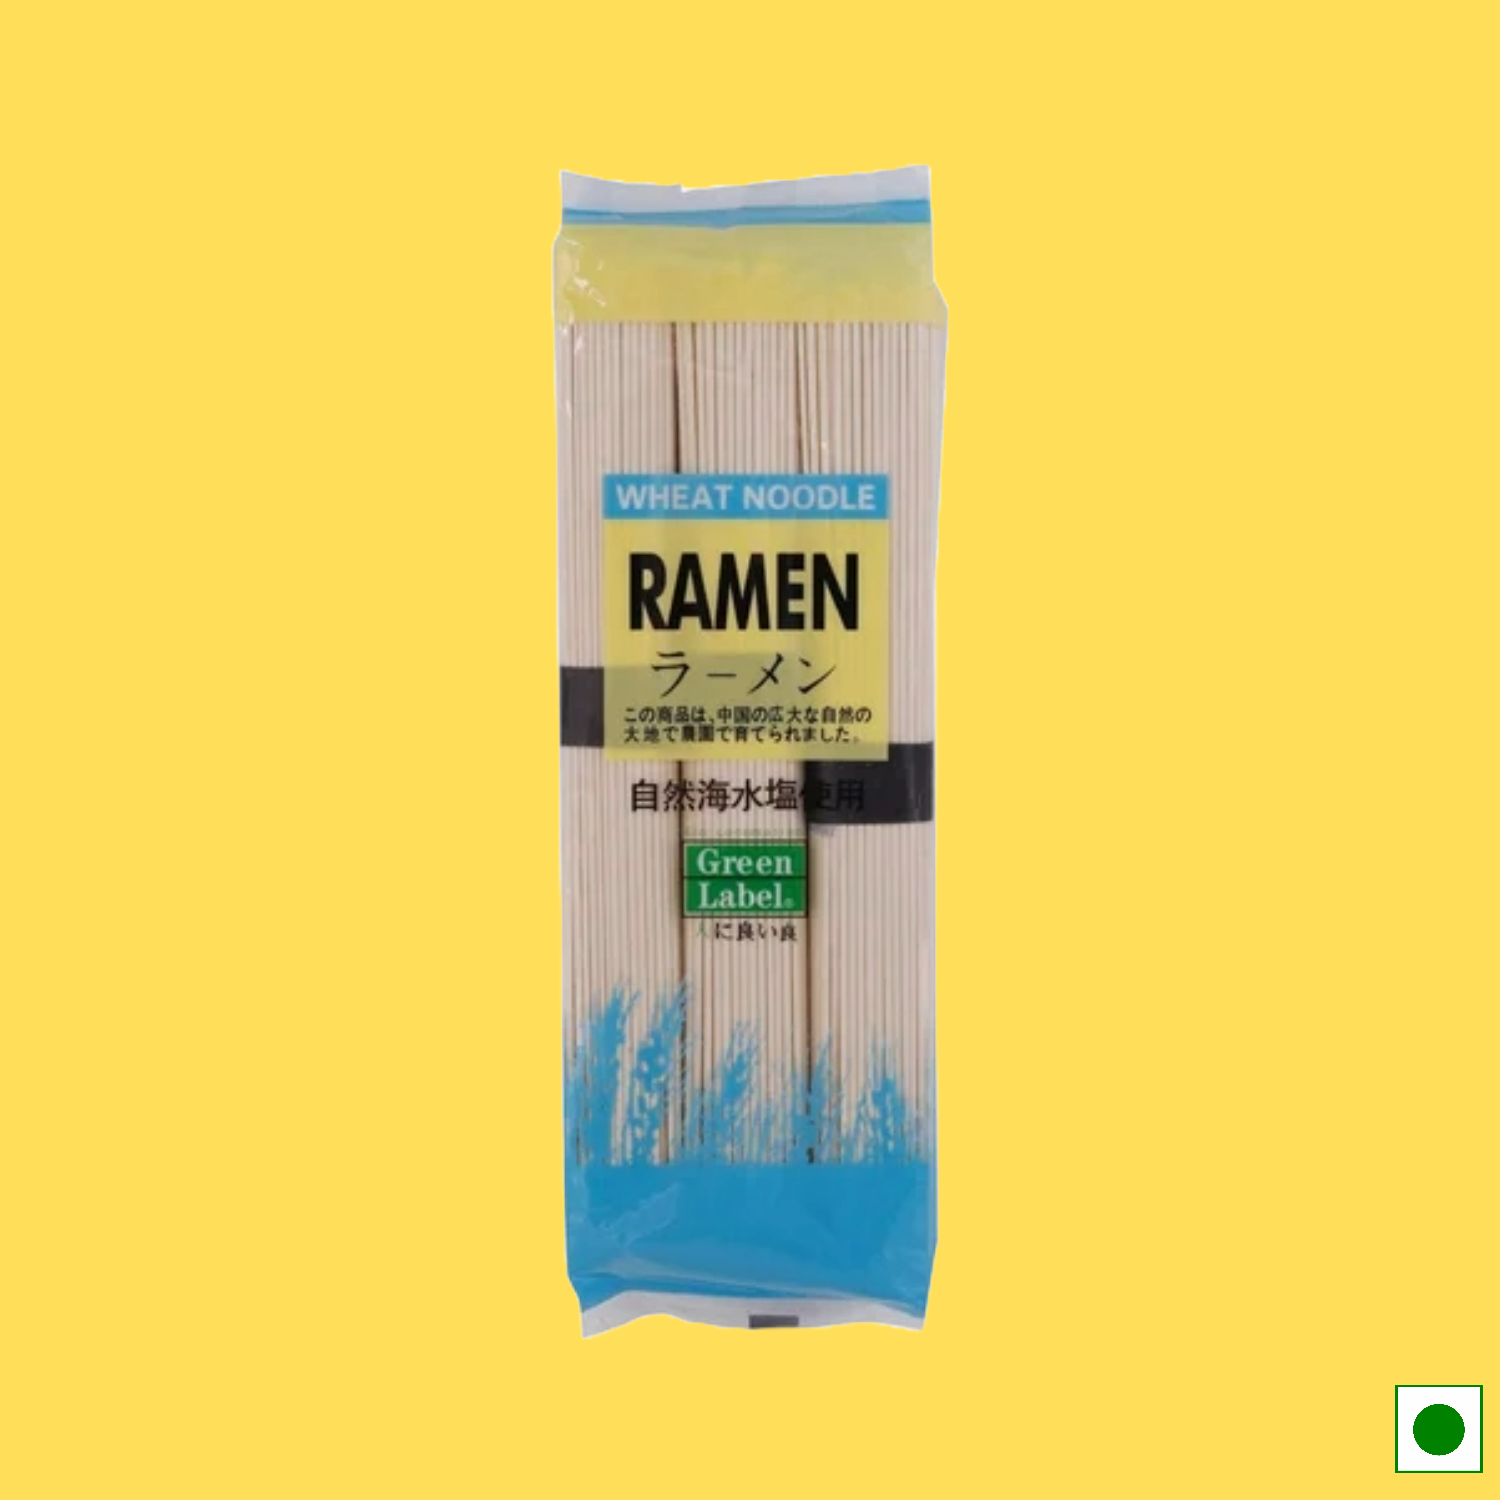 Green Label Wheat Ramen Noodle, 300g (Imported)